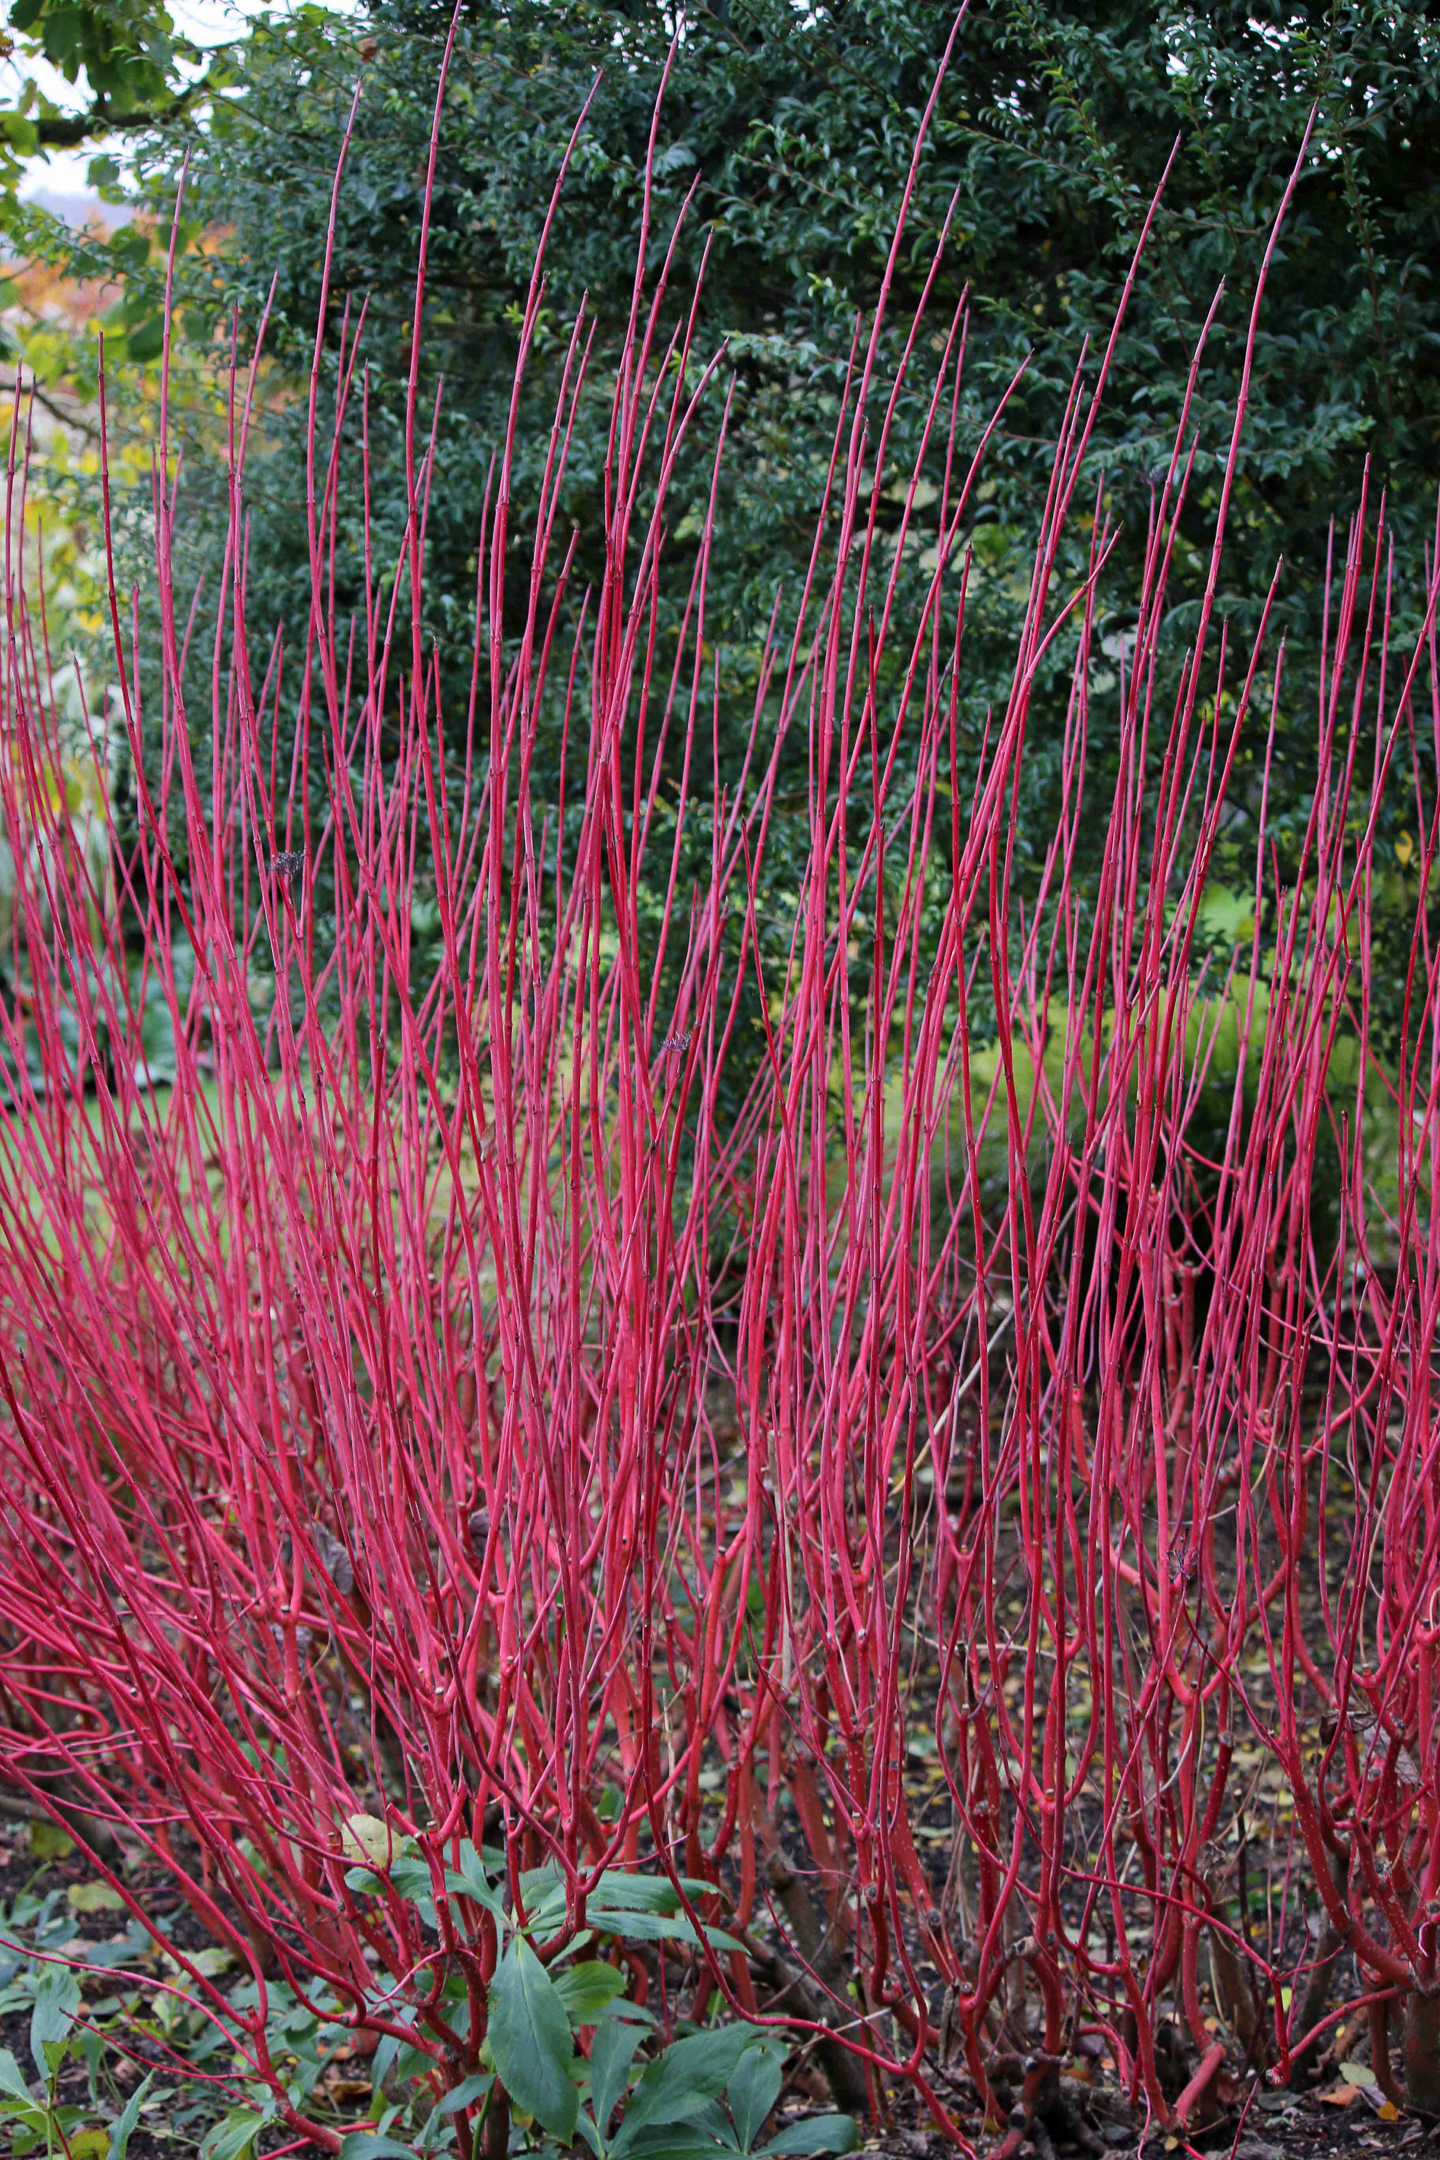 The red stems of red twig dogwood in the winter